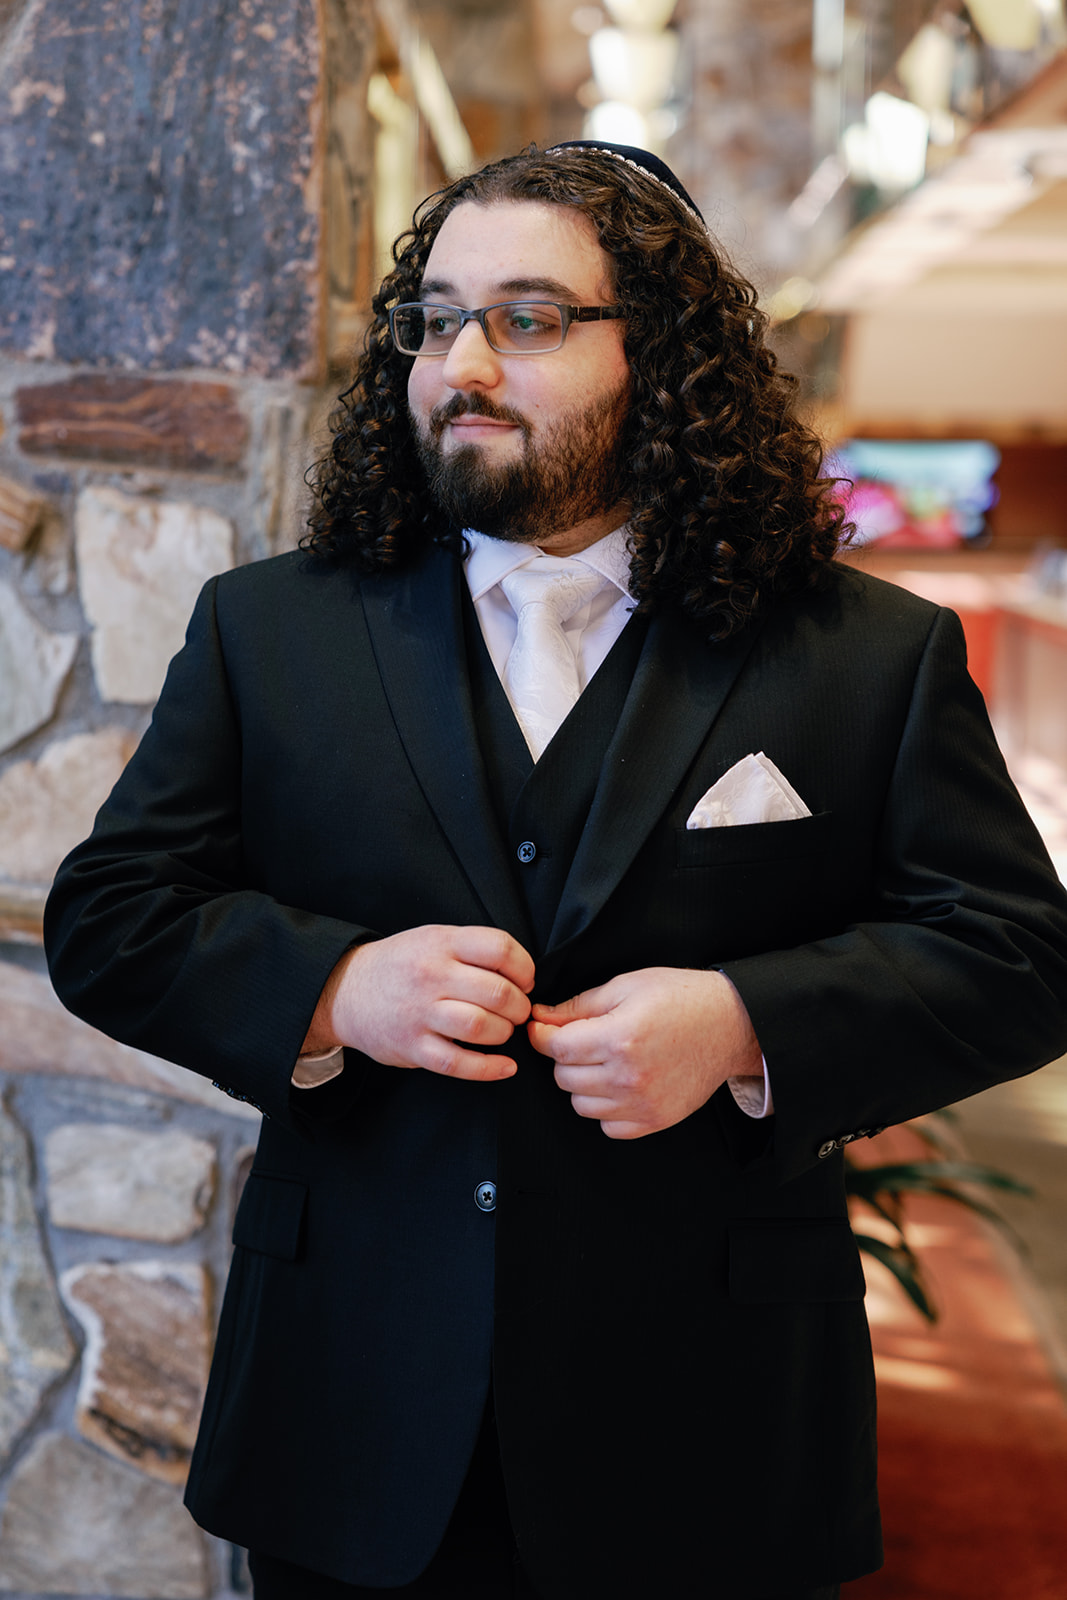 A groom in a black suit buttons his jacket while standing inside